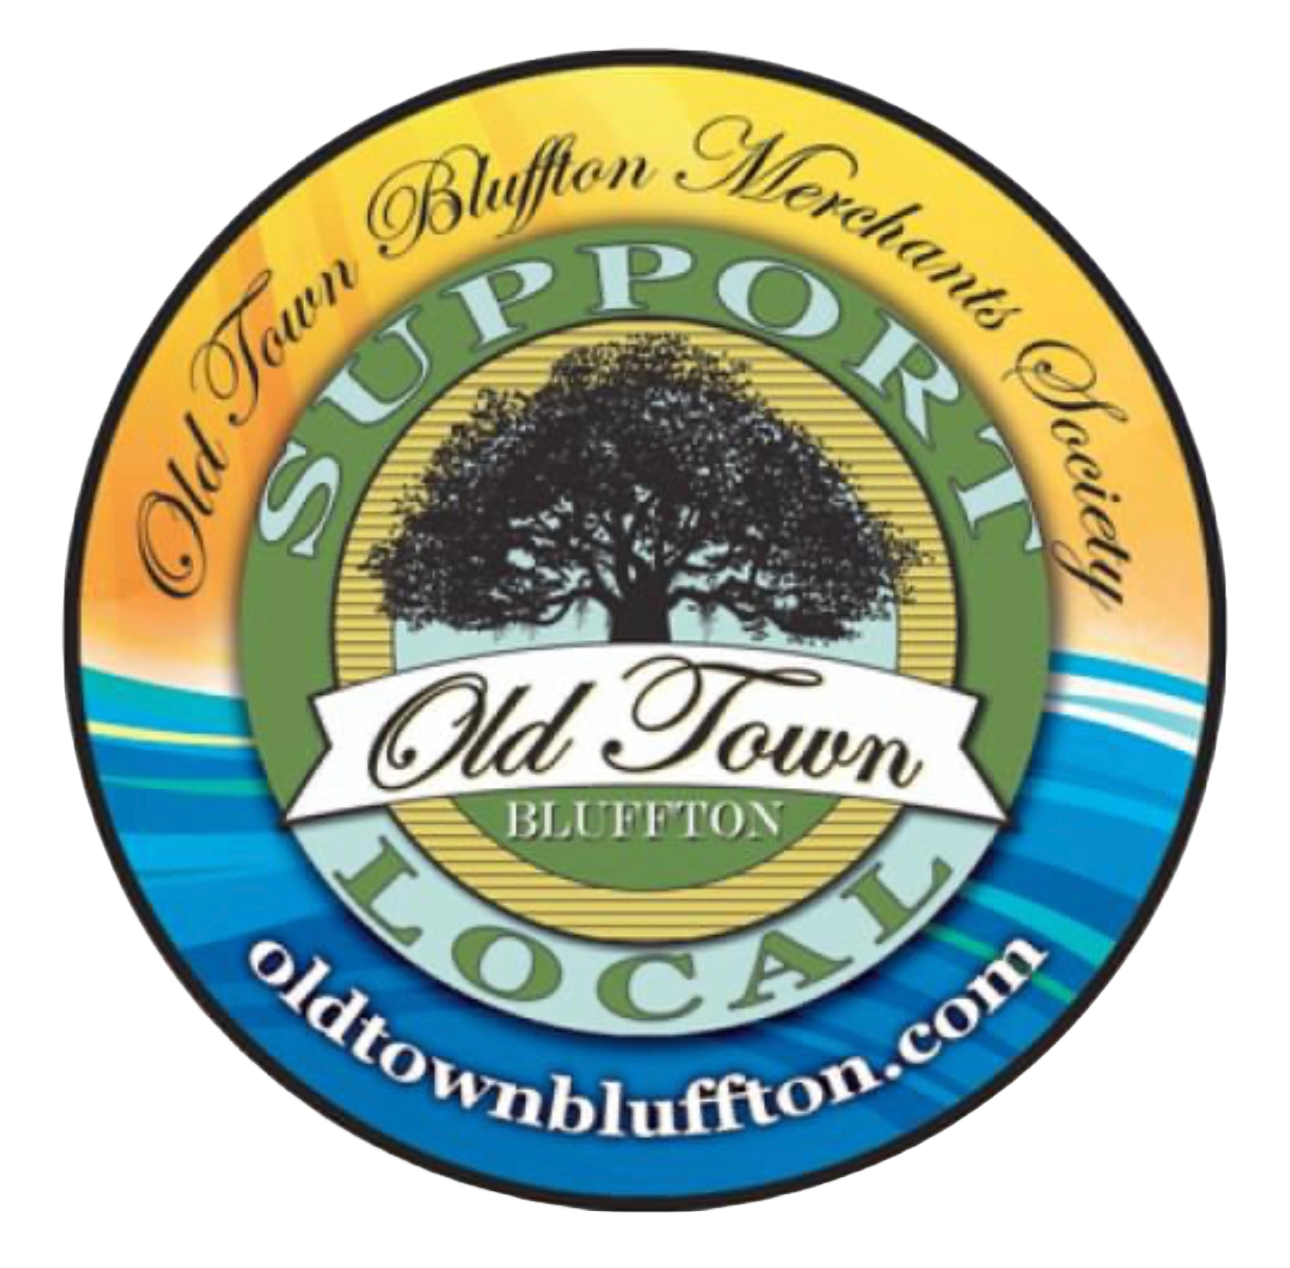 Shop Old Town Bluffton